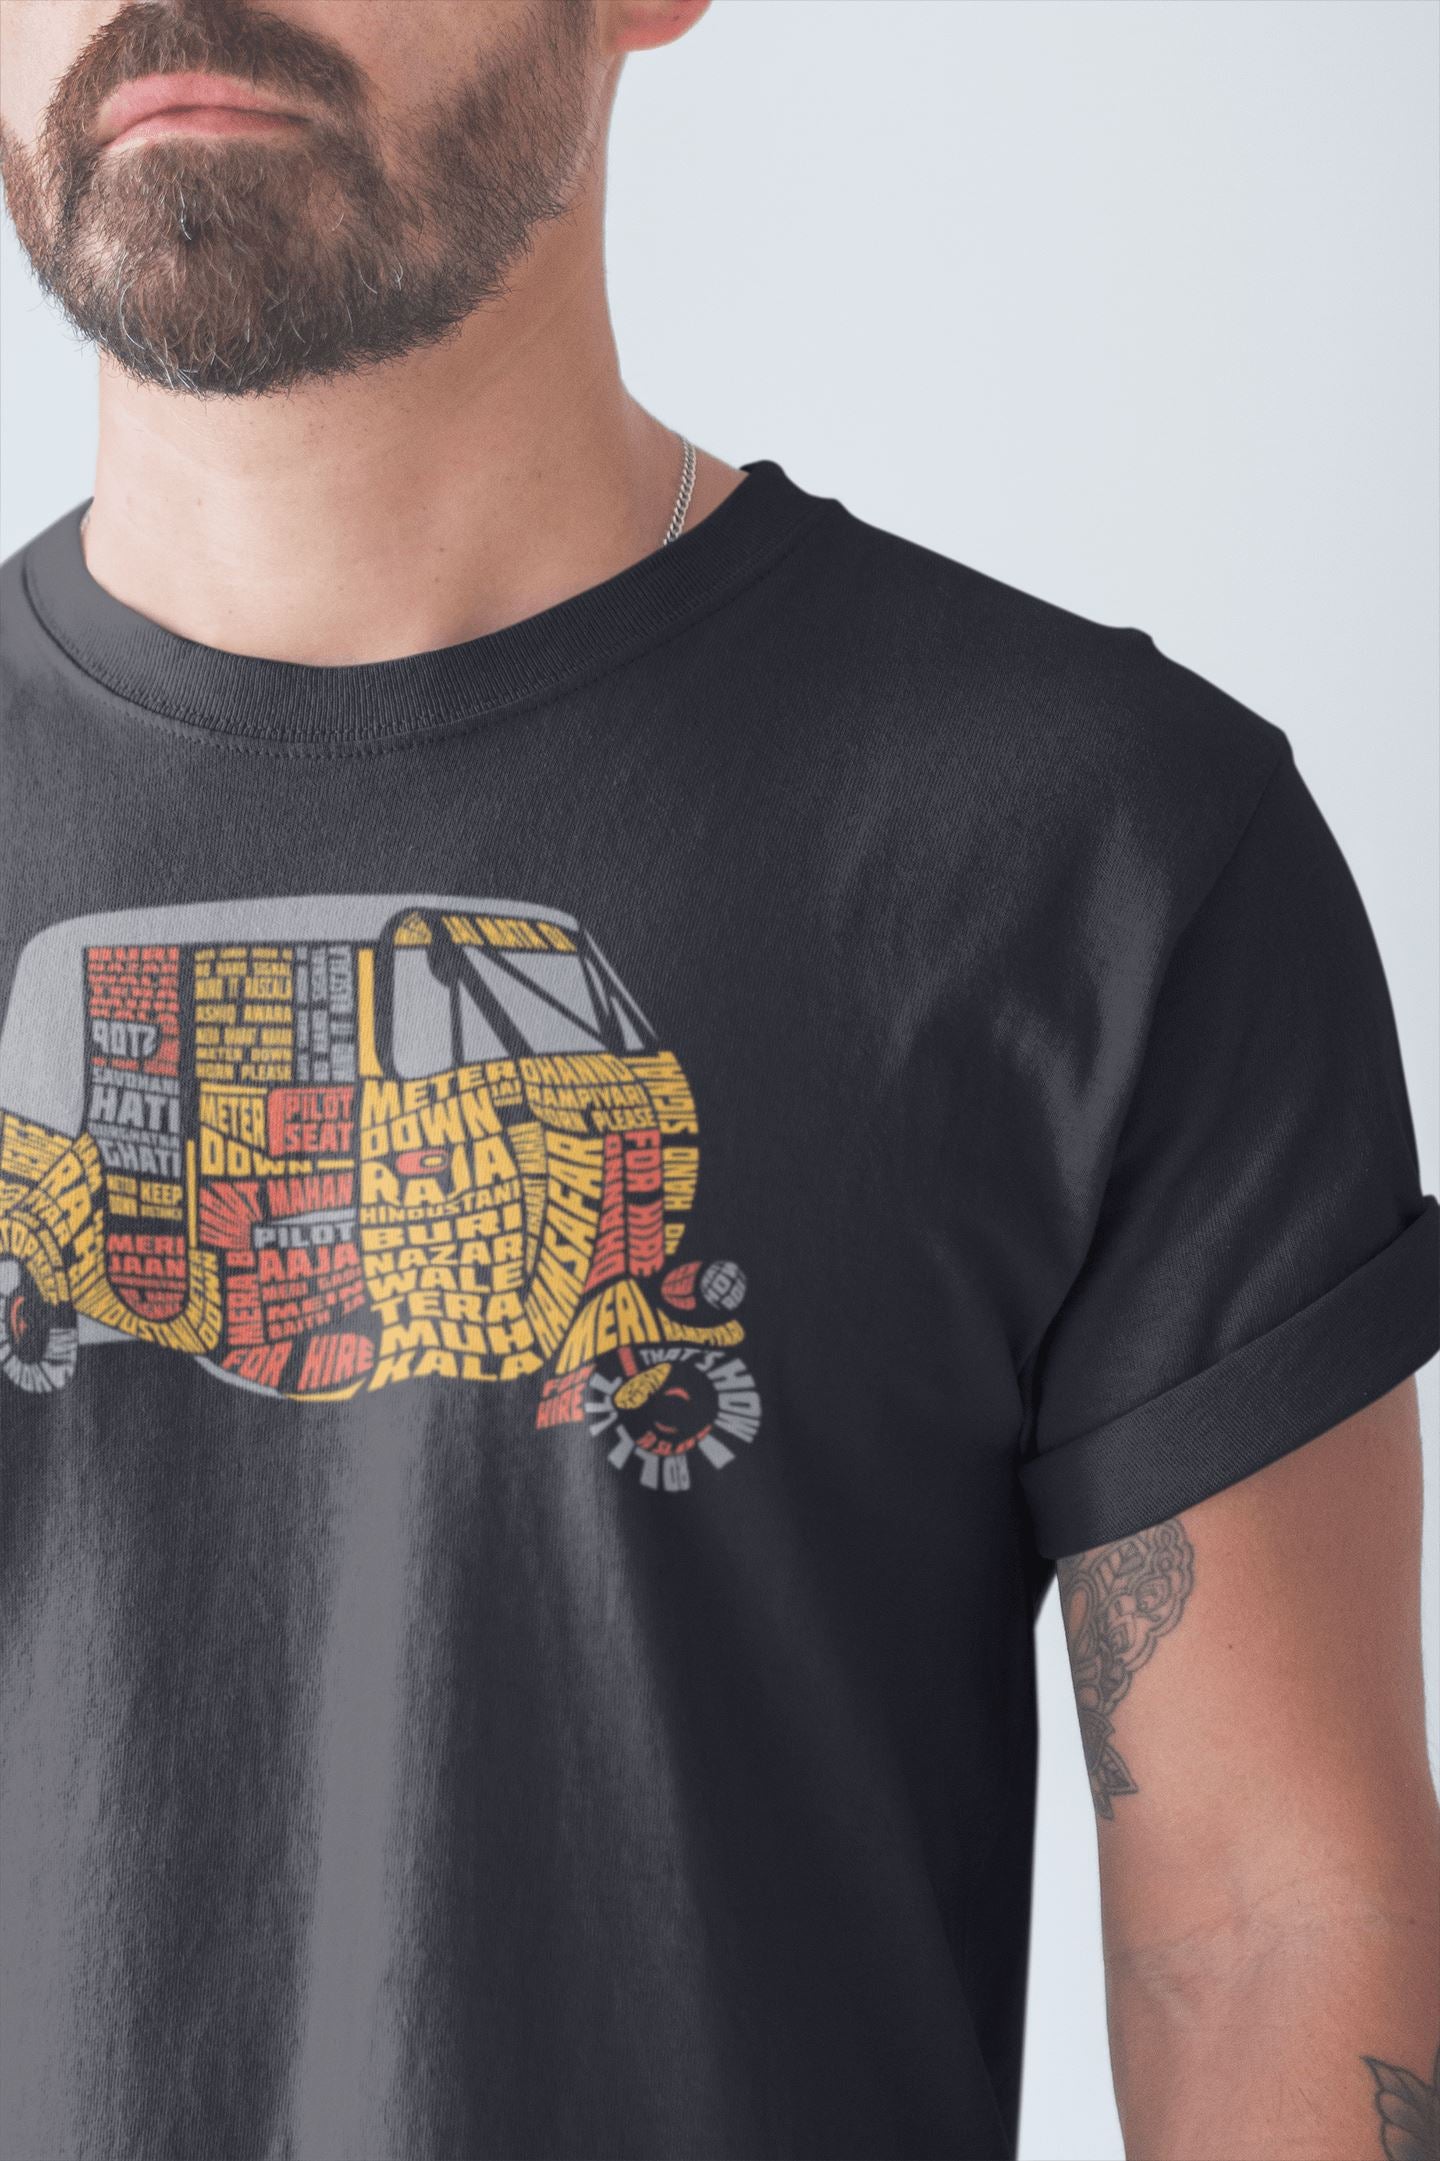 AutoRickshaw Made of Slangs Funny T Shirt for Men and Women | Premium Design | Catch My Drift India - Catch My Drift India  black, clothing, female, funny, general, made in india, shirt, t sh